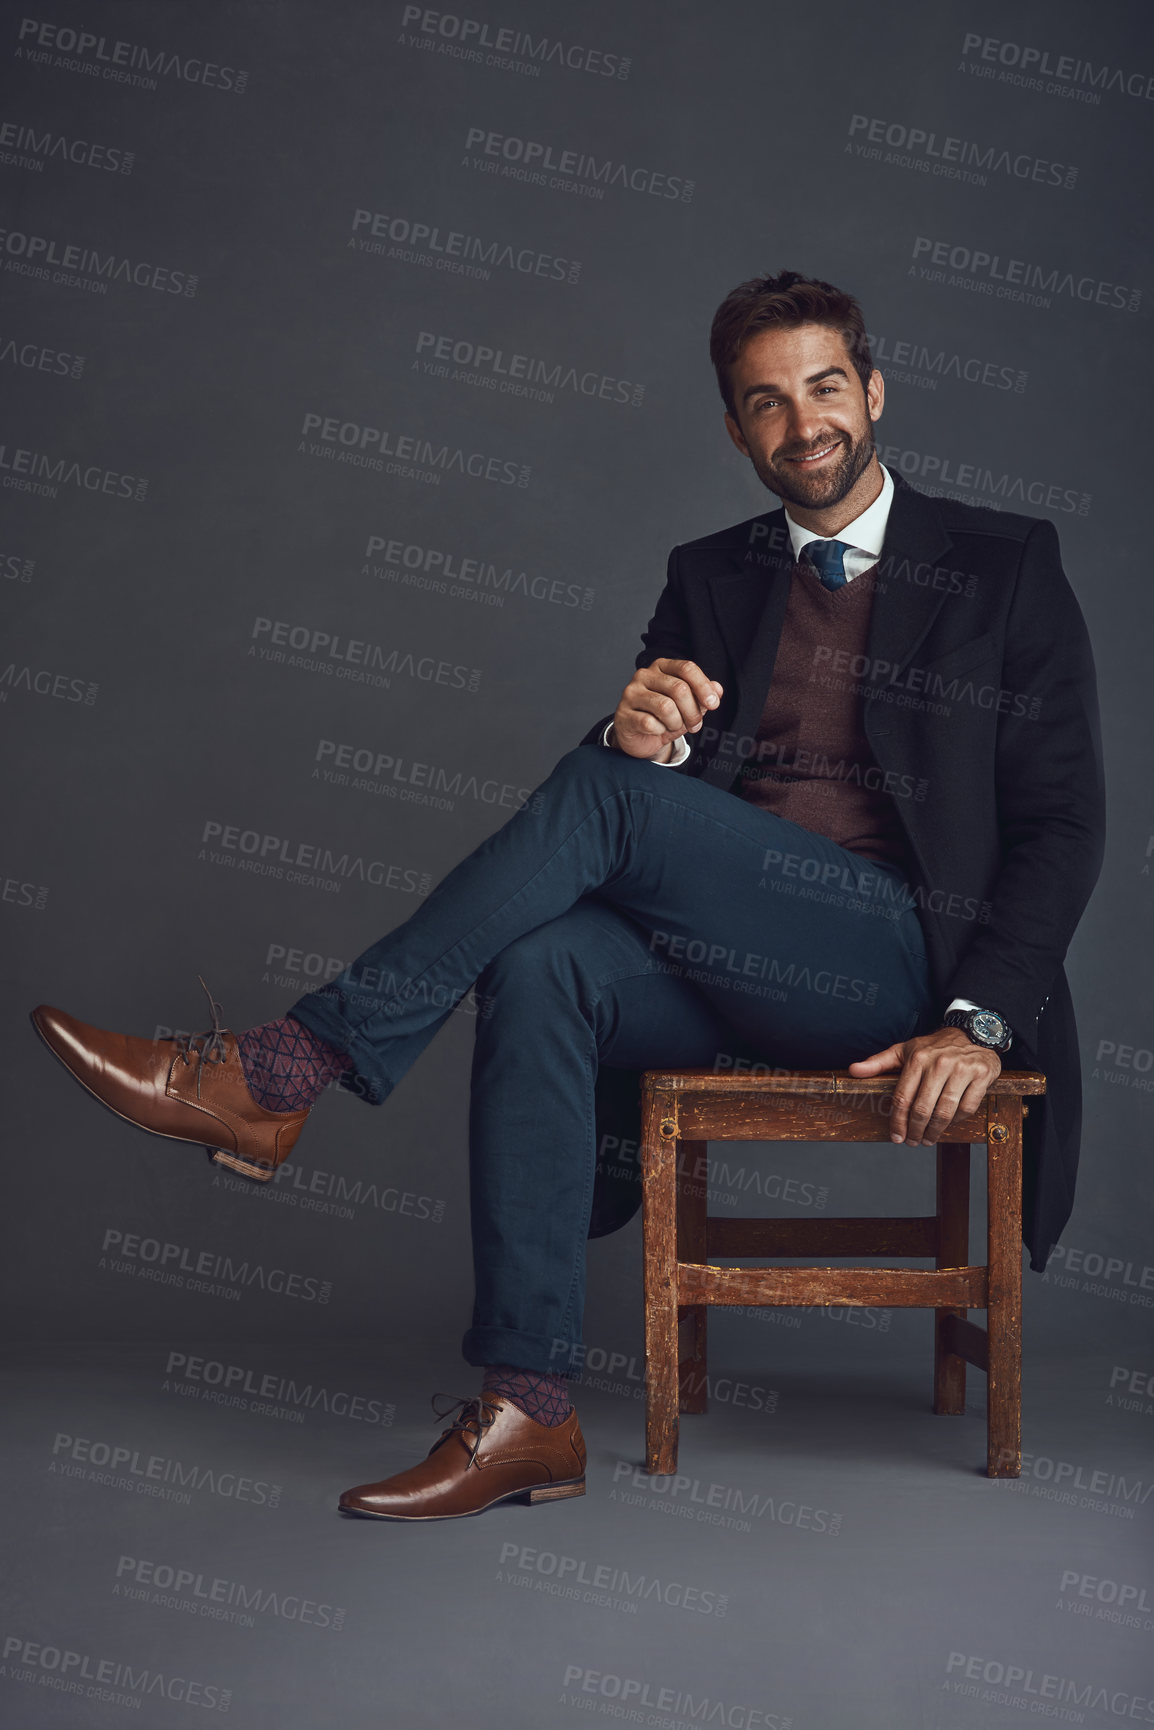 Buy stock photo Studio portrait of a stylishly dressed young man sitting on a chair against a gray background